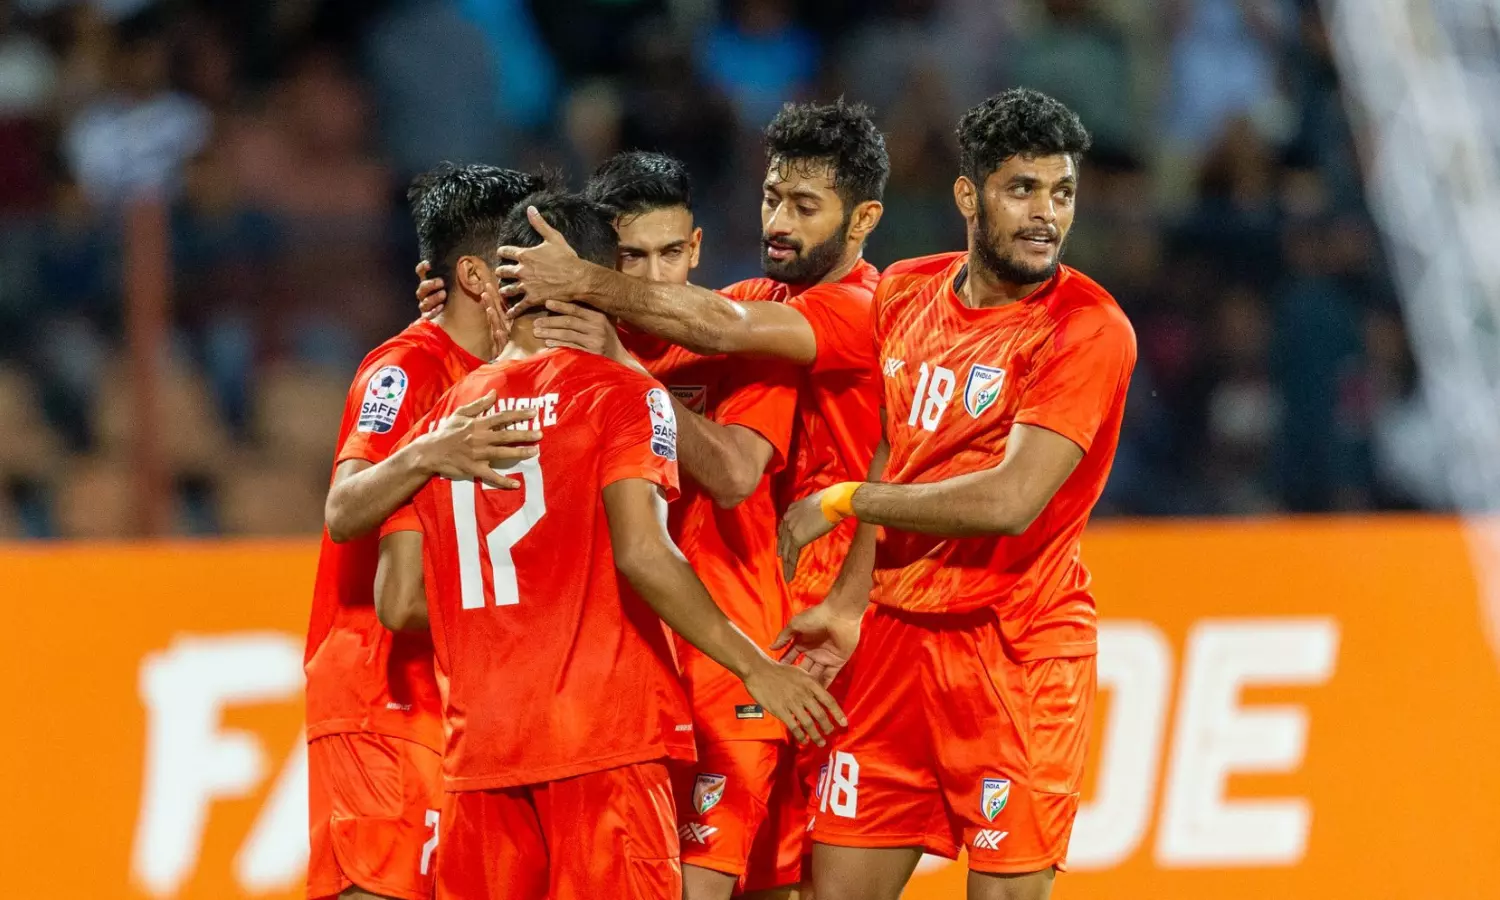 WATCH | Chettri, Chhangte & Samad produce a goal to remember for ages in final against Kuwait